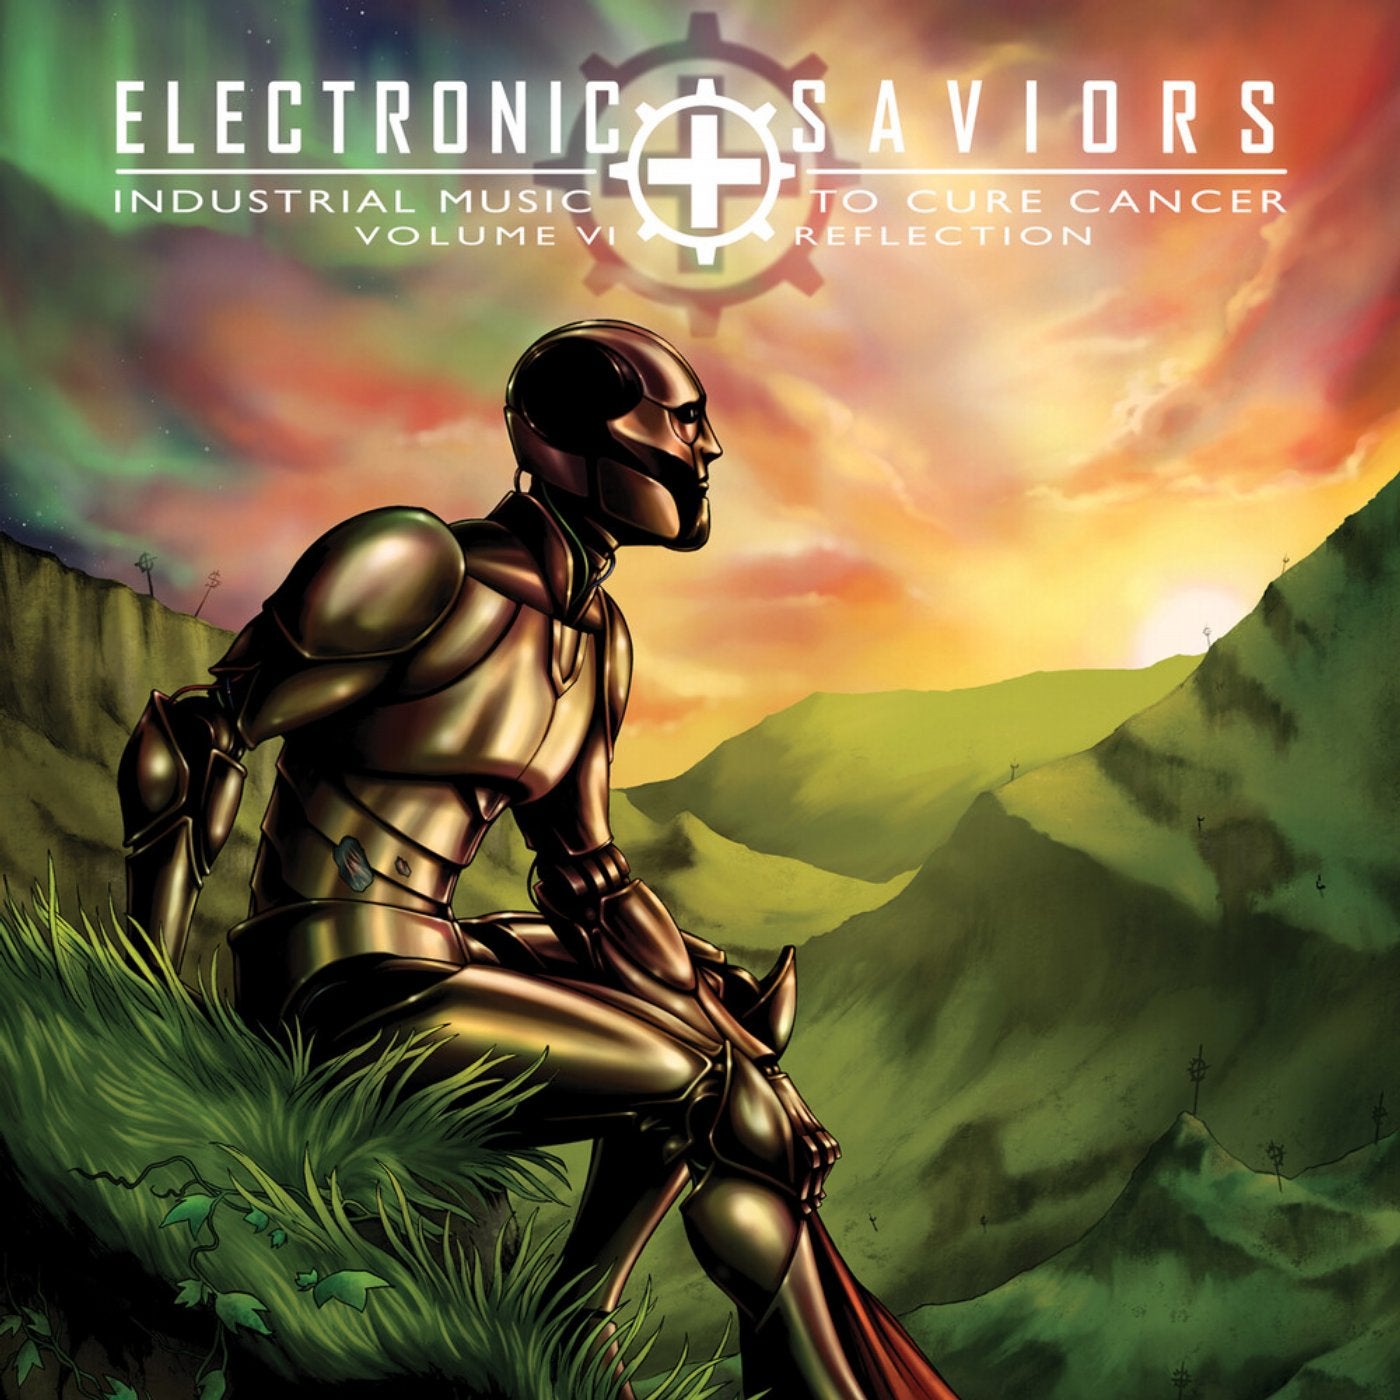 Electronic Saviors - Industrial Music To Cure Cancer, Vol VI: Reflection